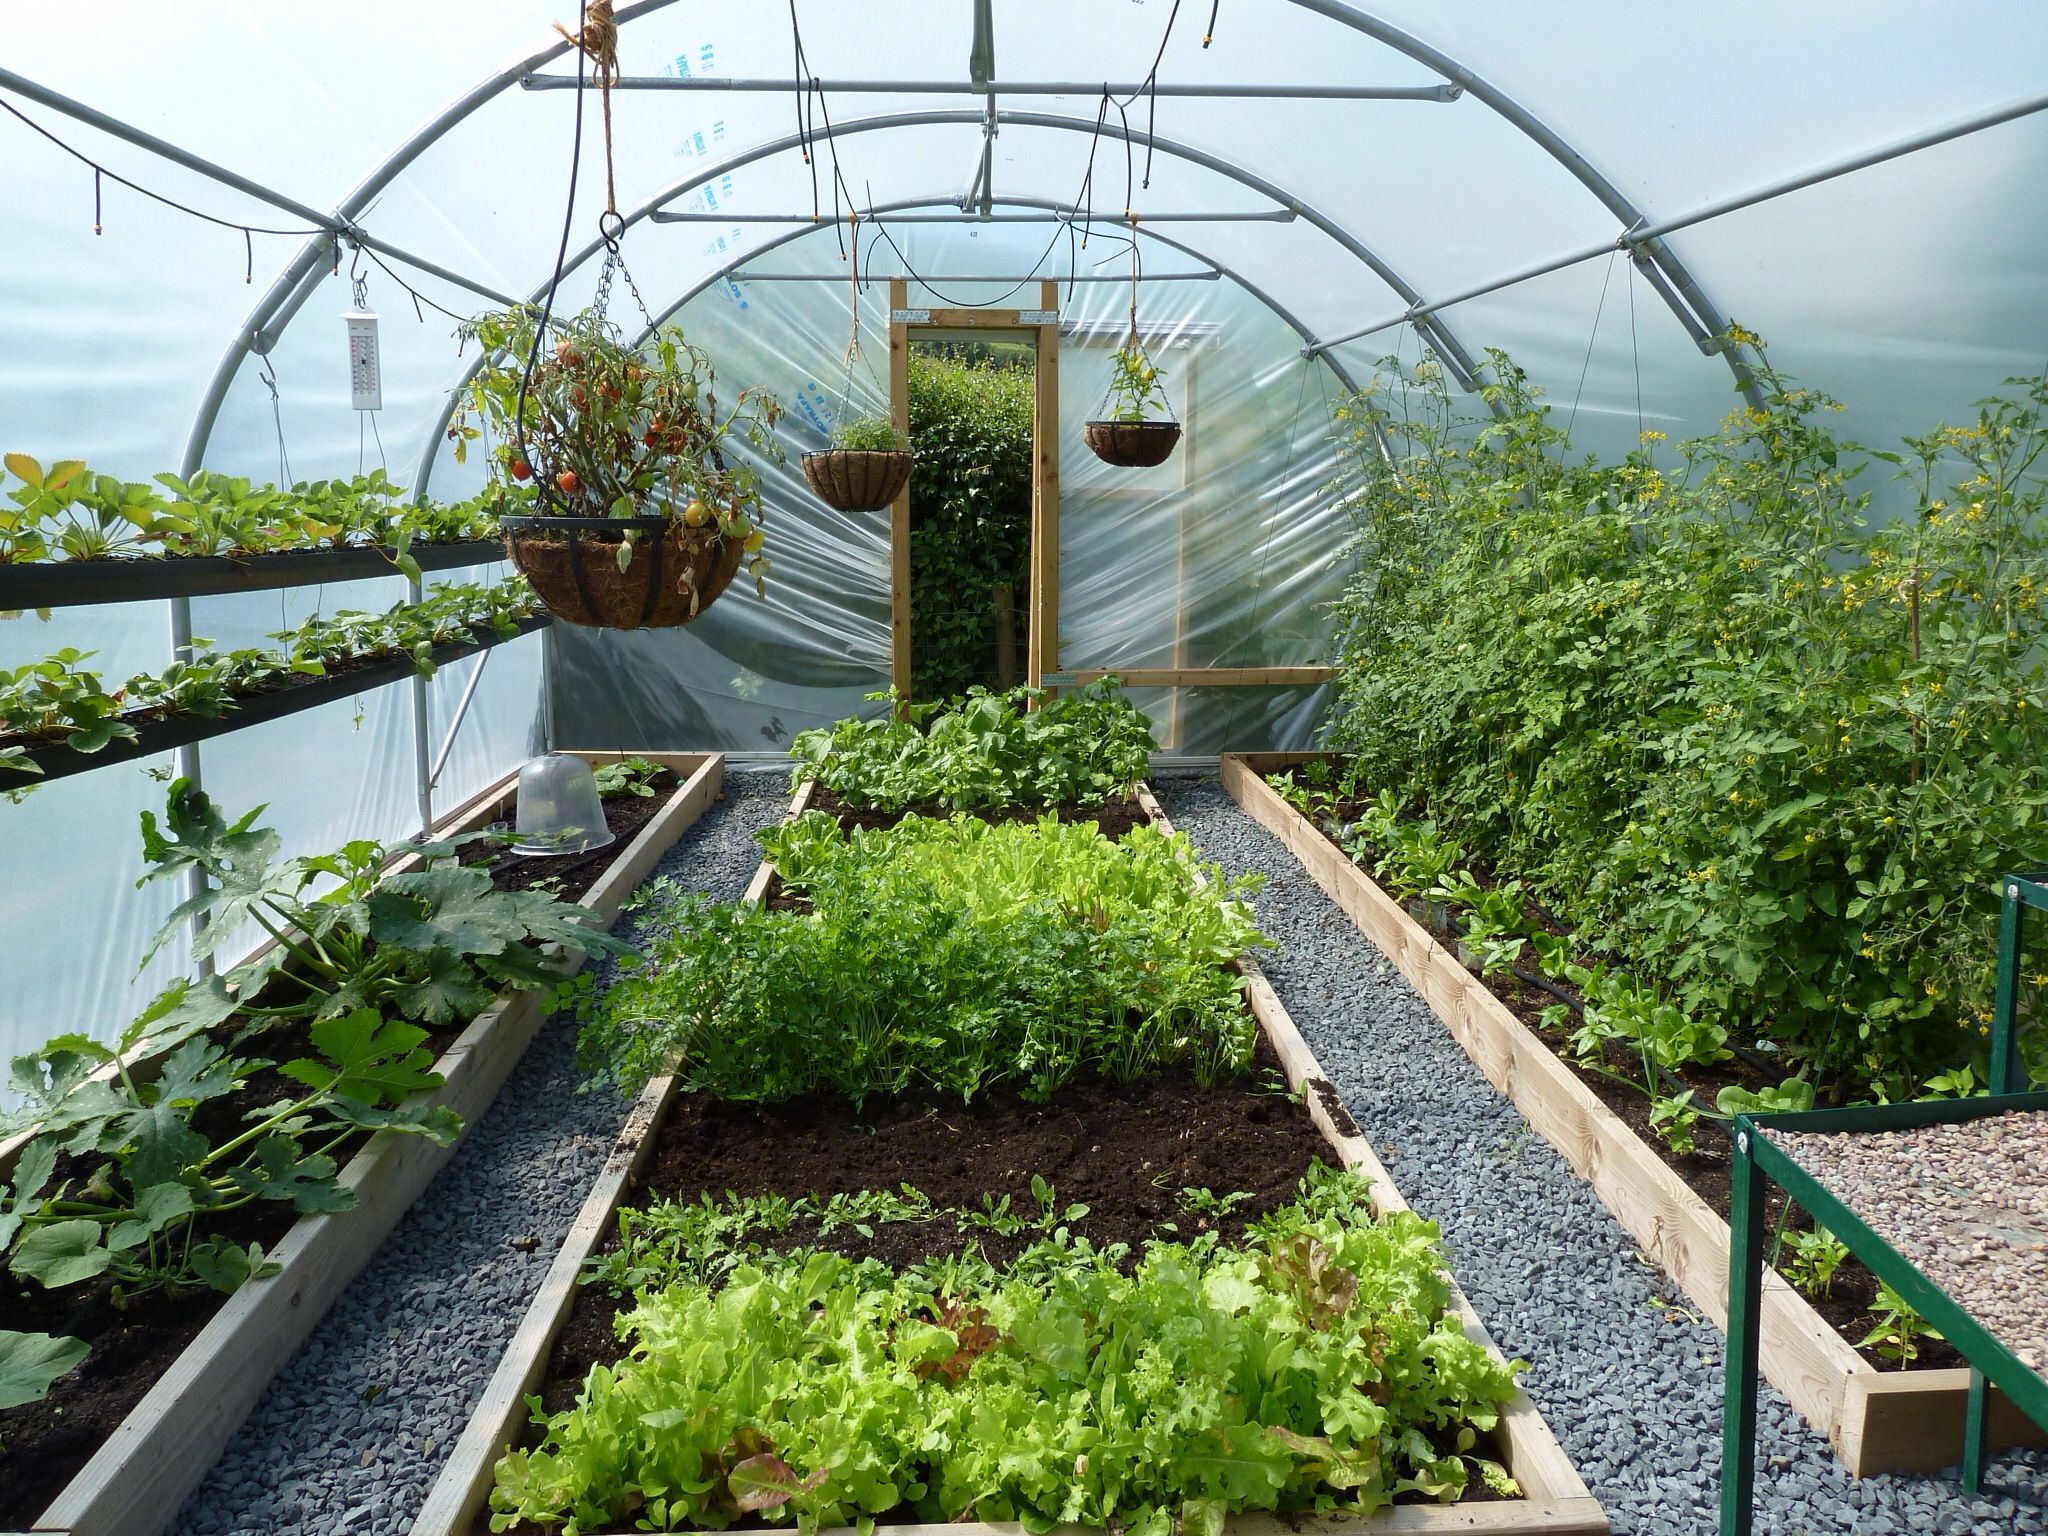 Use of a greenhouse to harbor vegetables